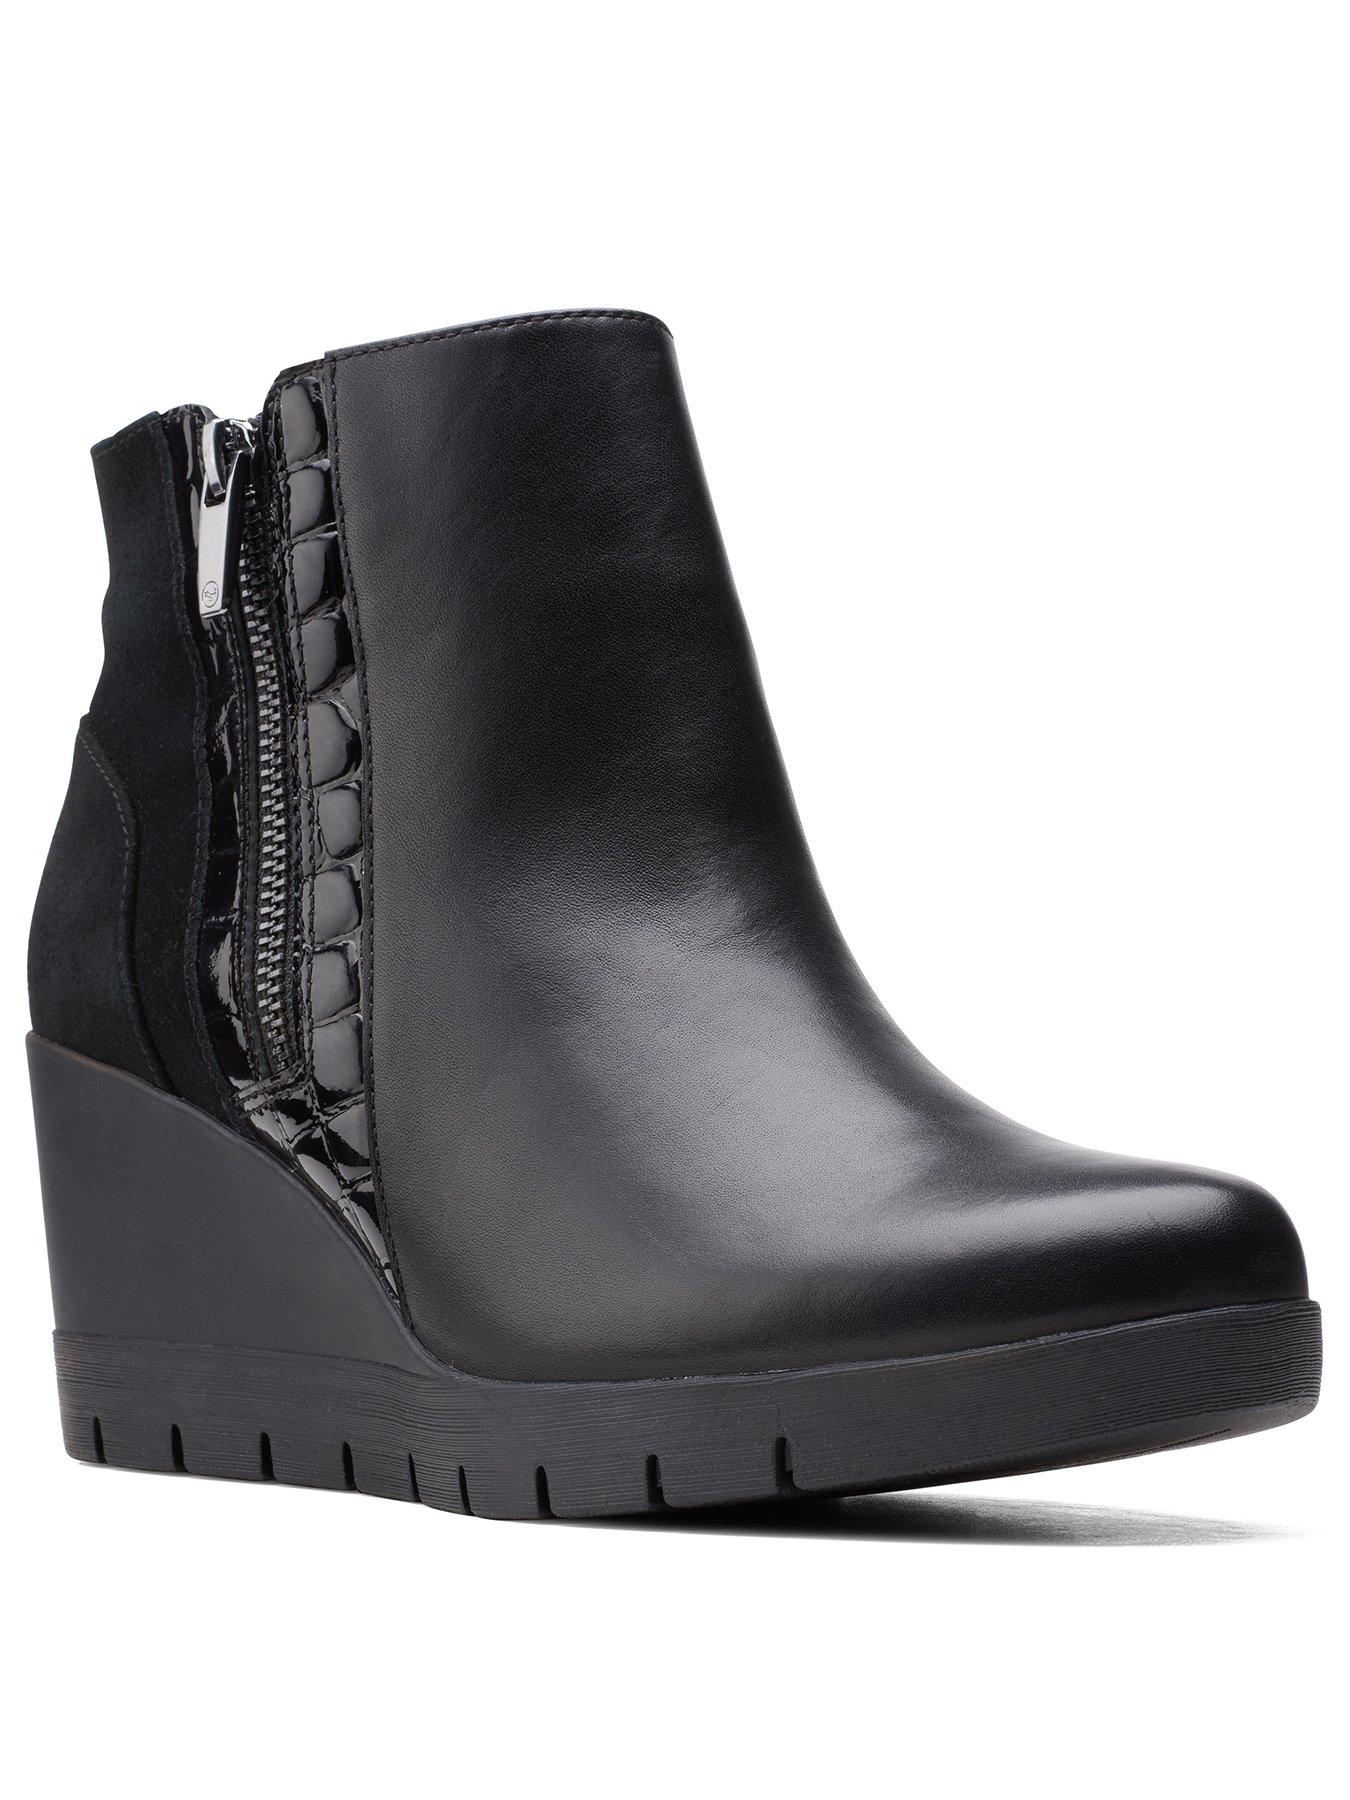 clarks black leather wedge ankle boots